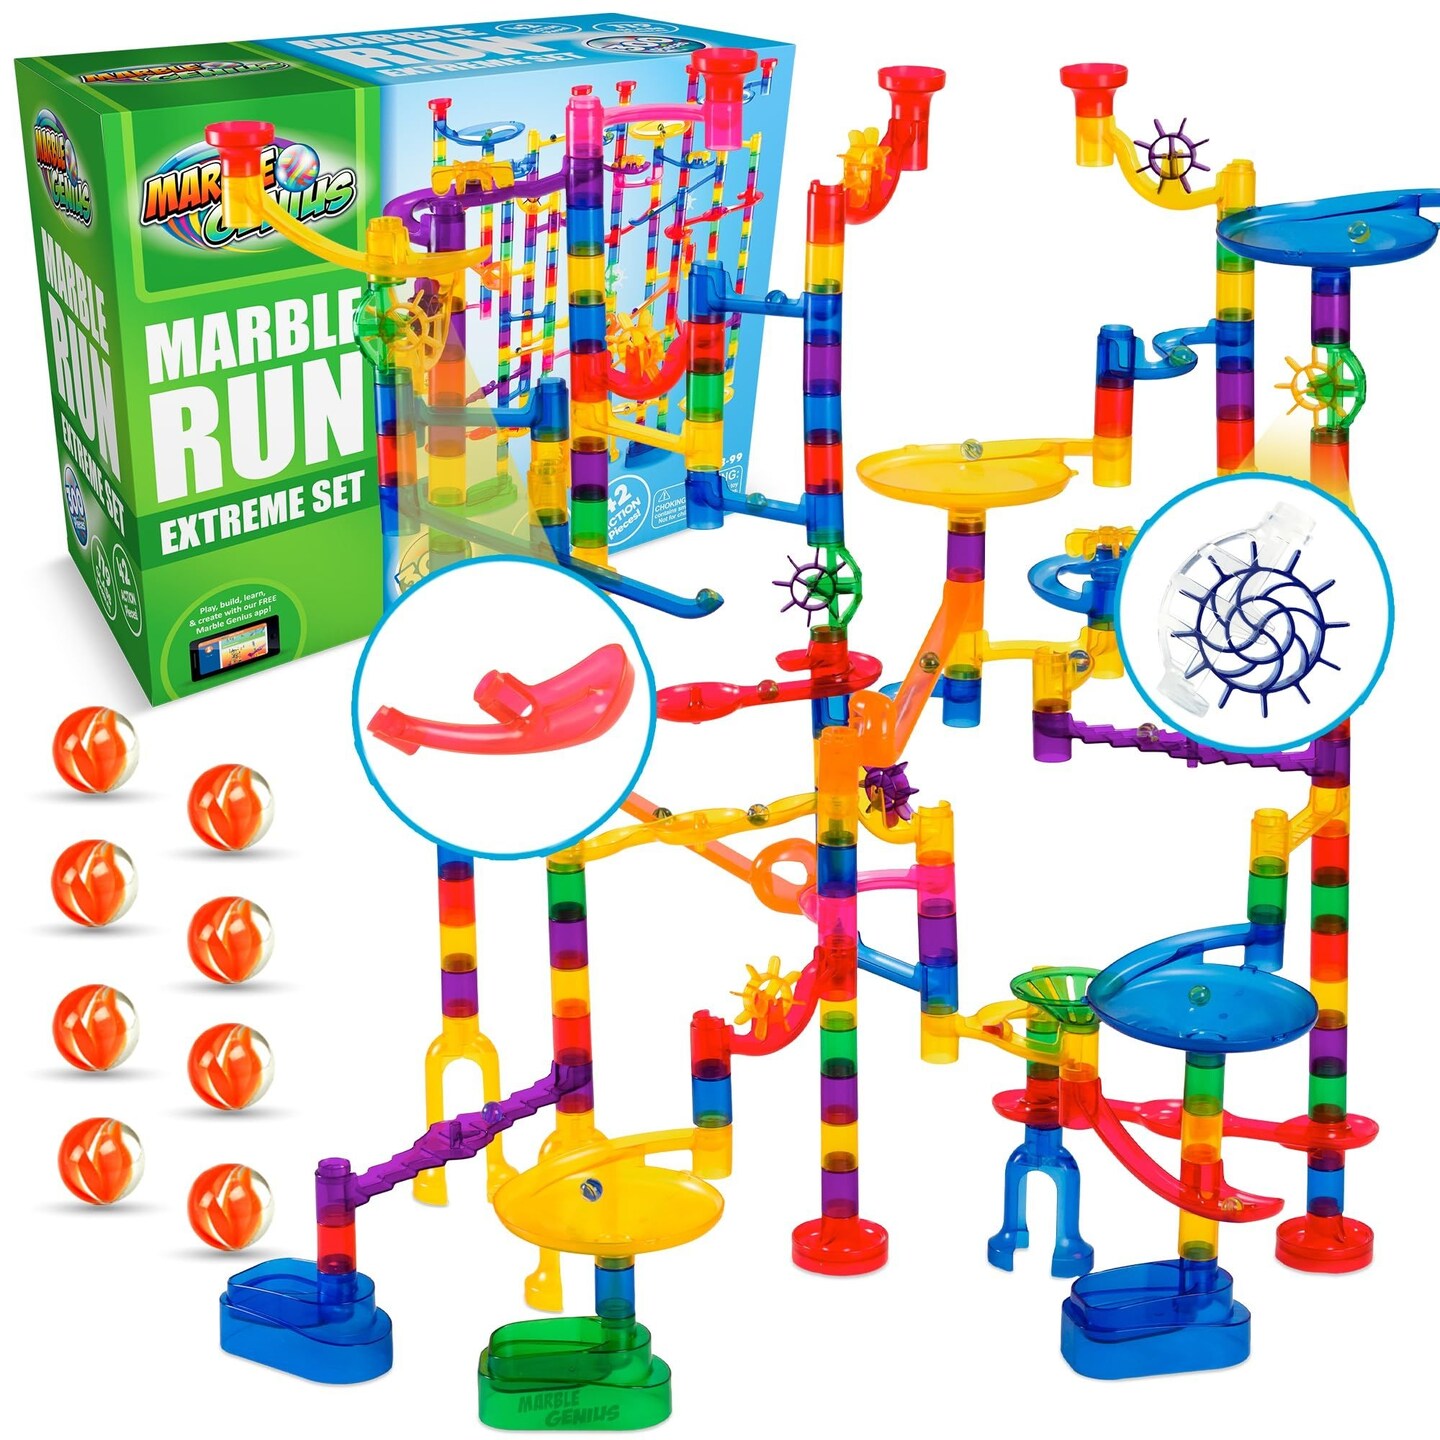 Marble Genius Marble Run - Maze Track Toys for Adults, Teens, Toddlers, or Kids Aged 4-8 Years Old, 300 Complete Pieces (181 Translucent Marbulous Pieces + 119 Glass-Marble Set), Extreme Set